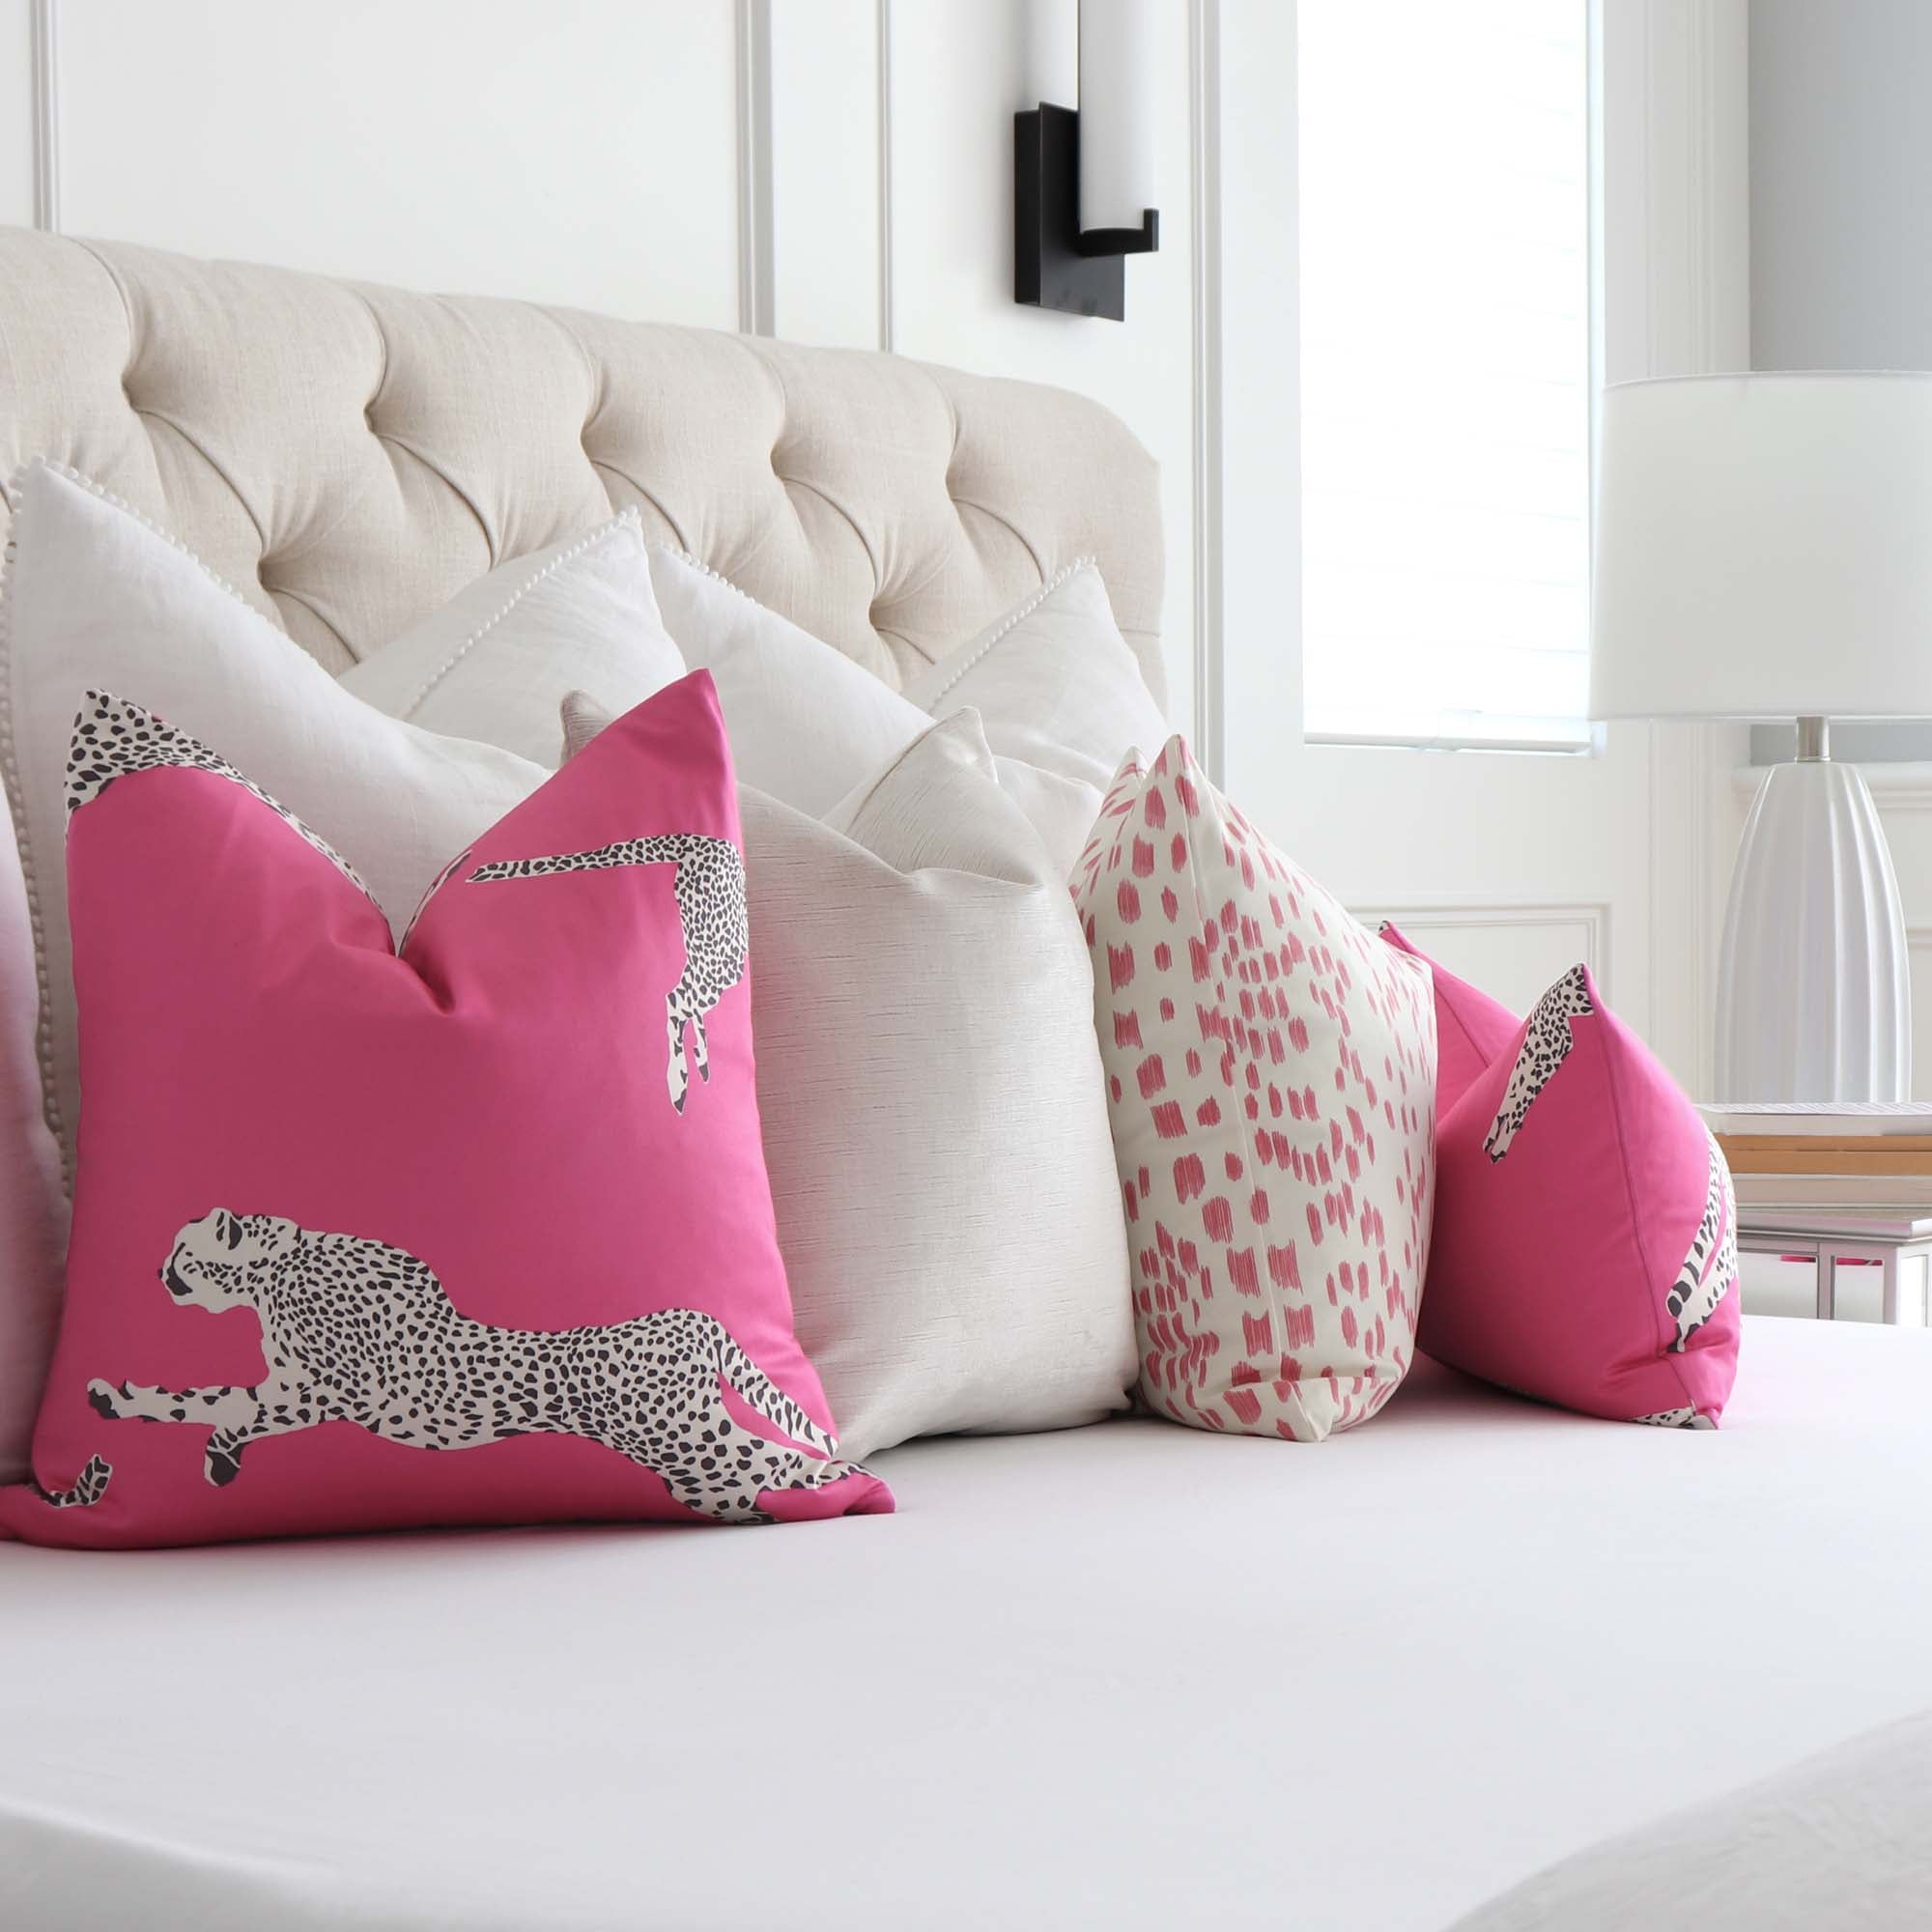 Scalamandre Leaping Cheetah Bubblegum Pink Animal Print Luxury Decorative Throw Pillow Cover with Matching Throw Pillows For Bedroom